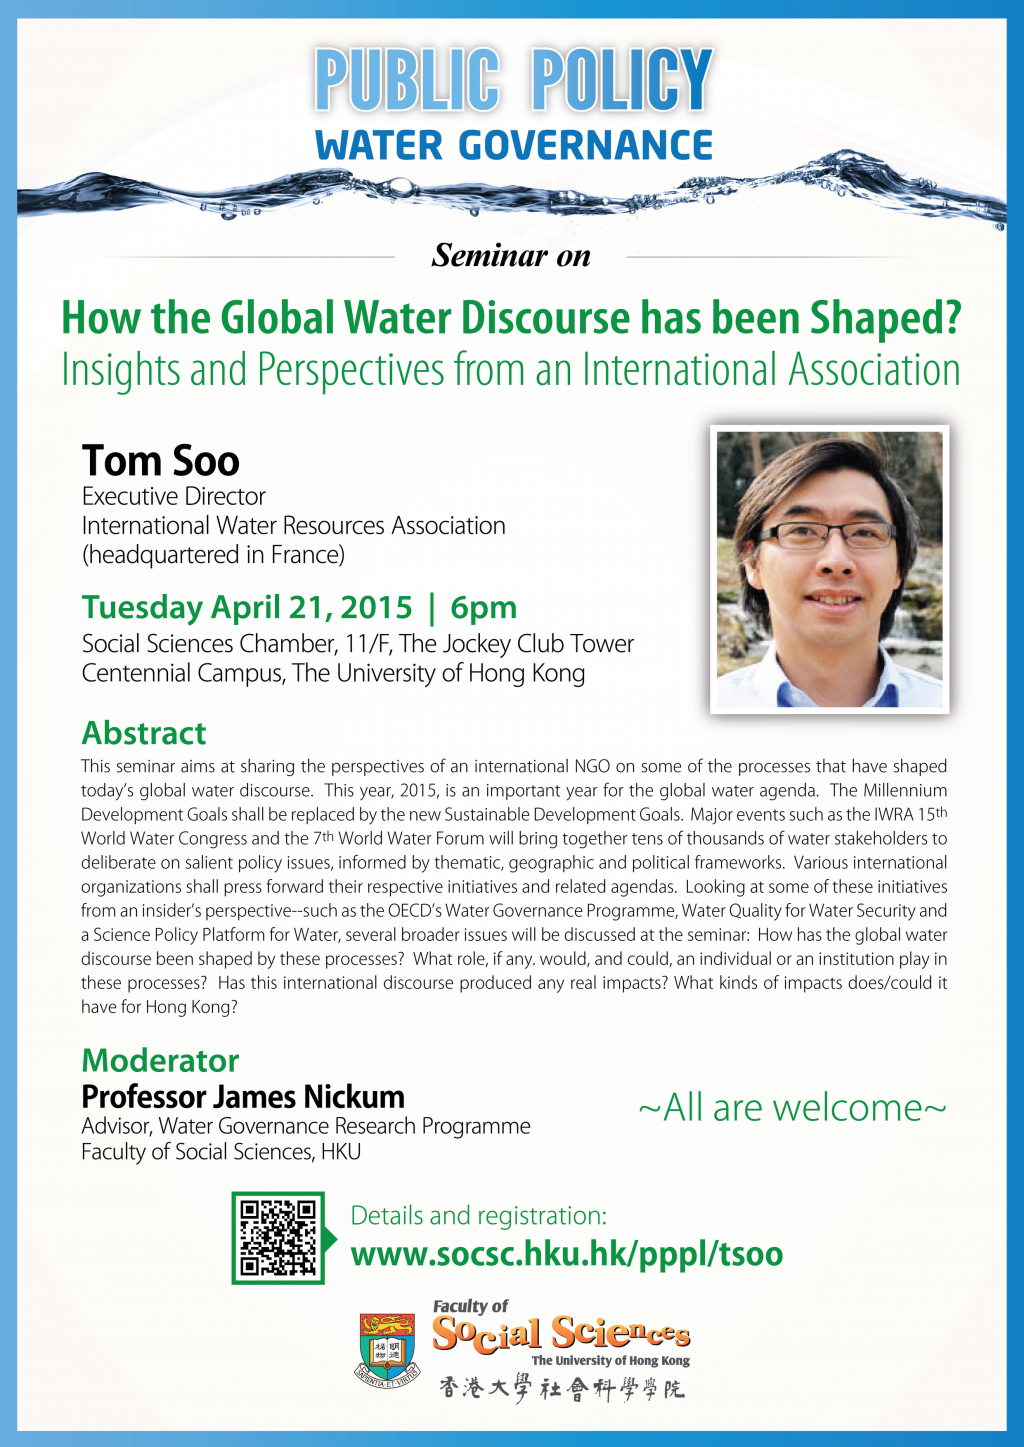 Public Policy Water Governance - How the Global Water Discourse has been Shaped?